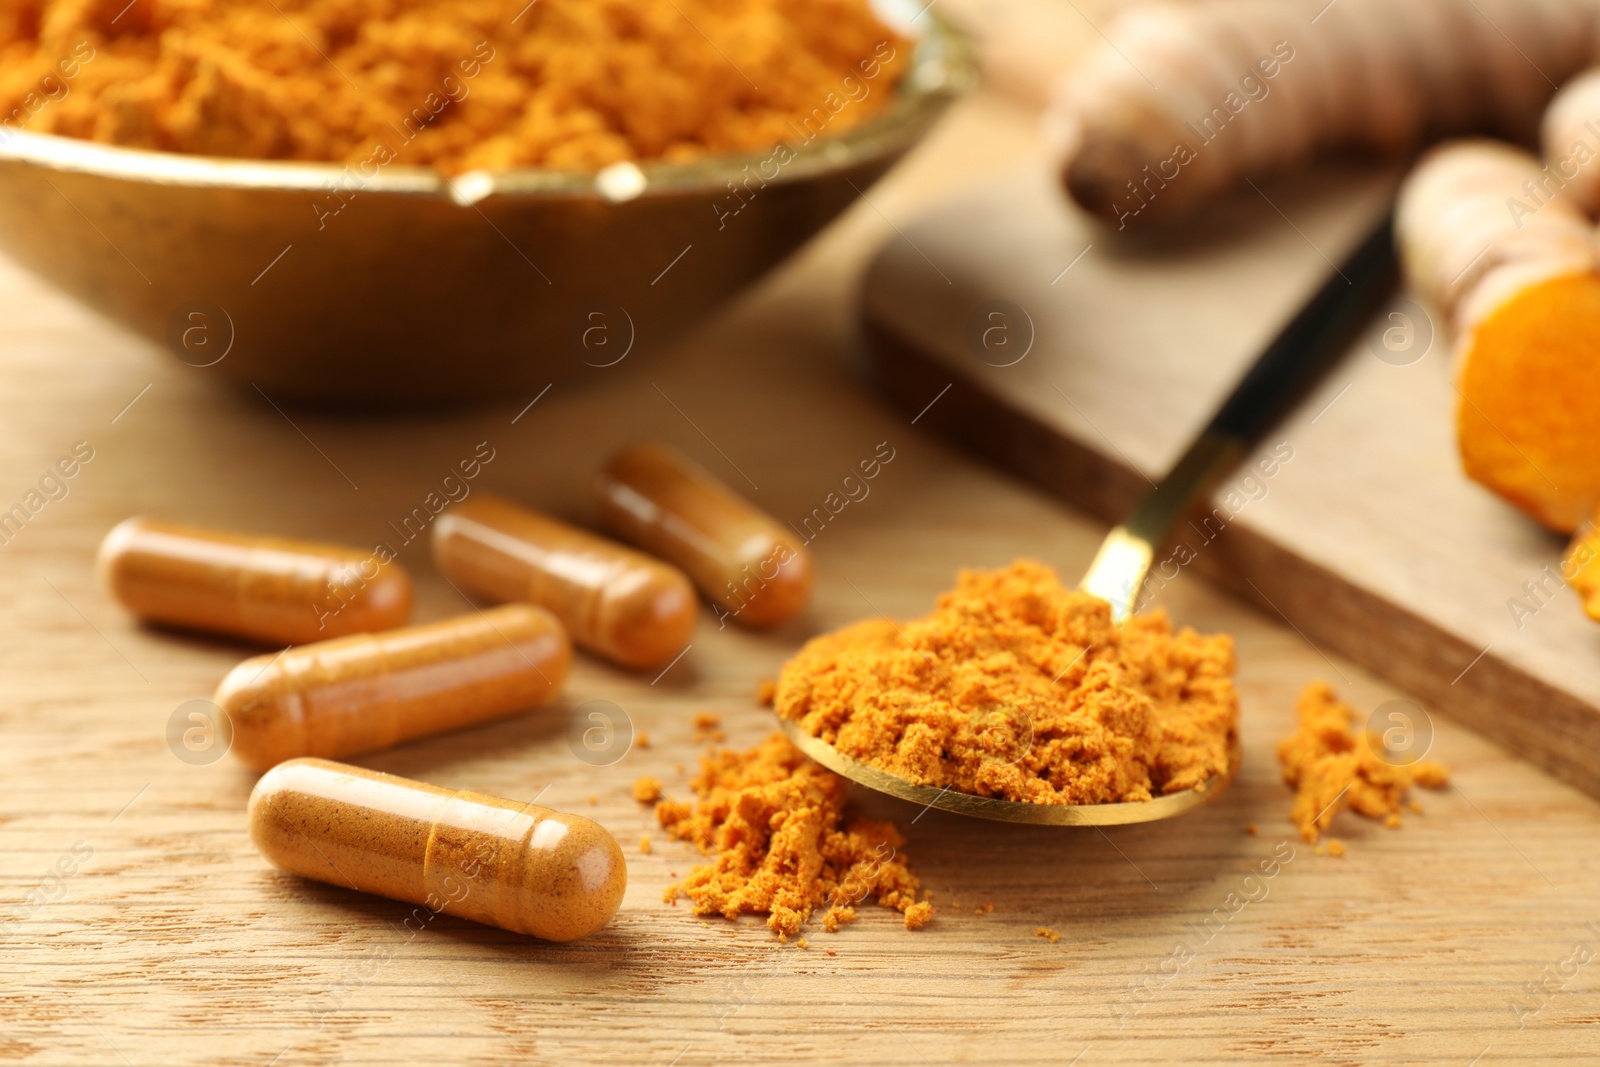 Photo of Aromatic turmeric powder and pills on wooden table, closeup